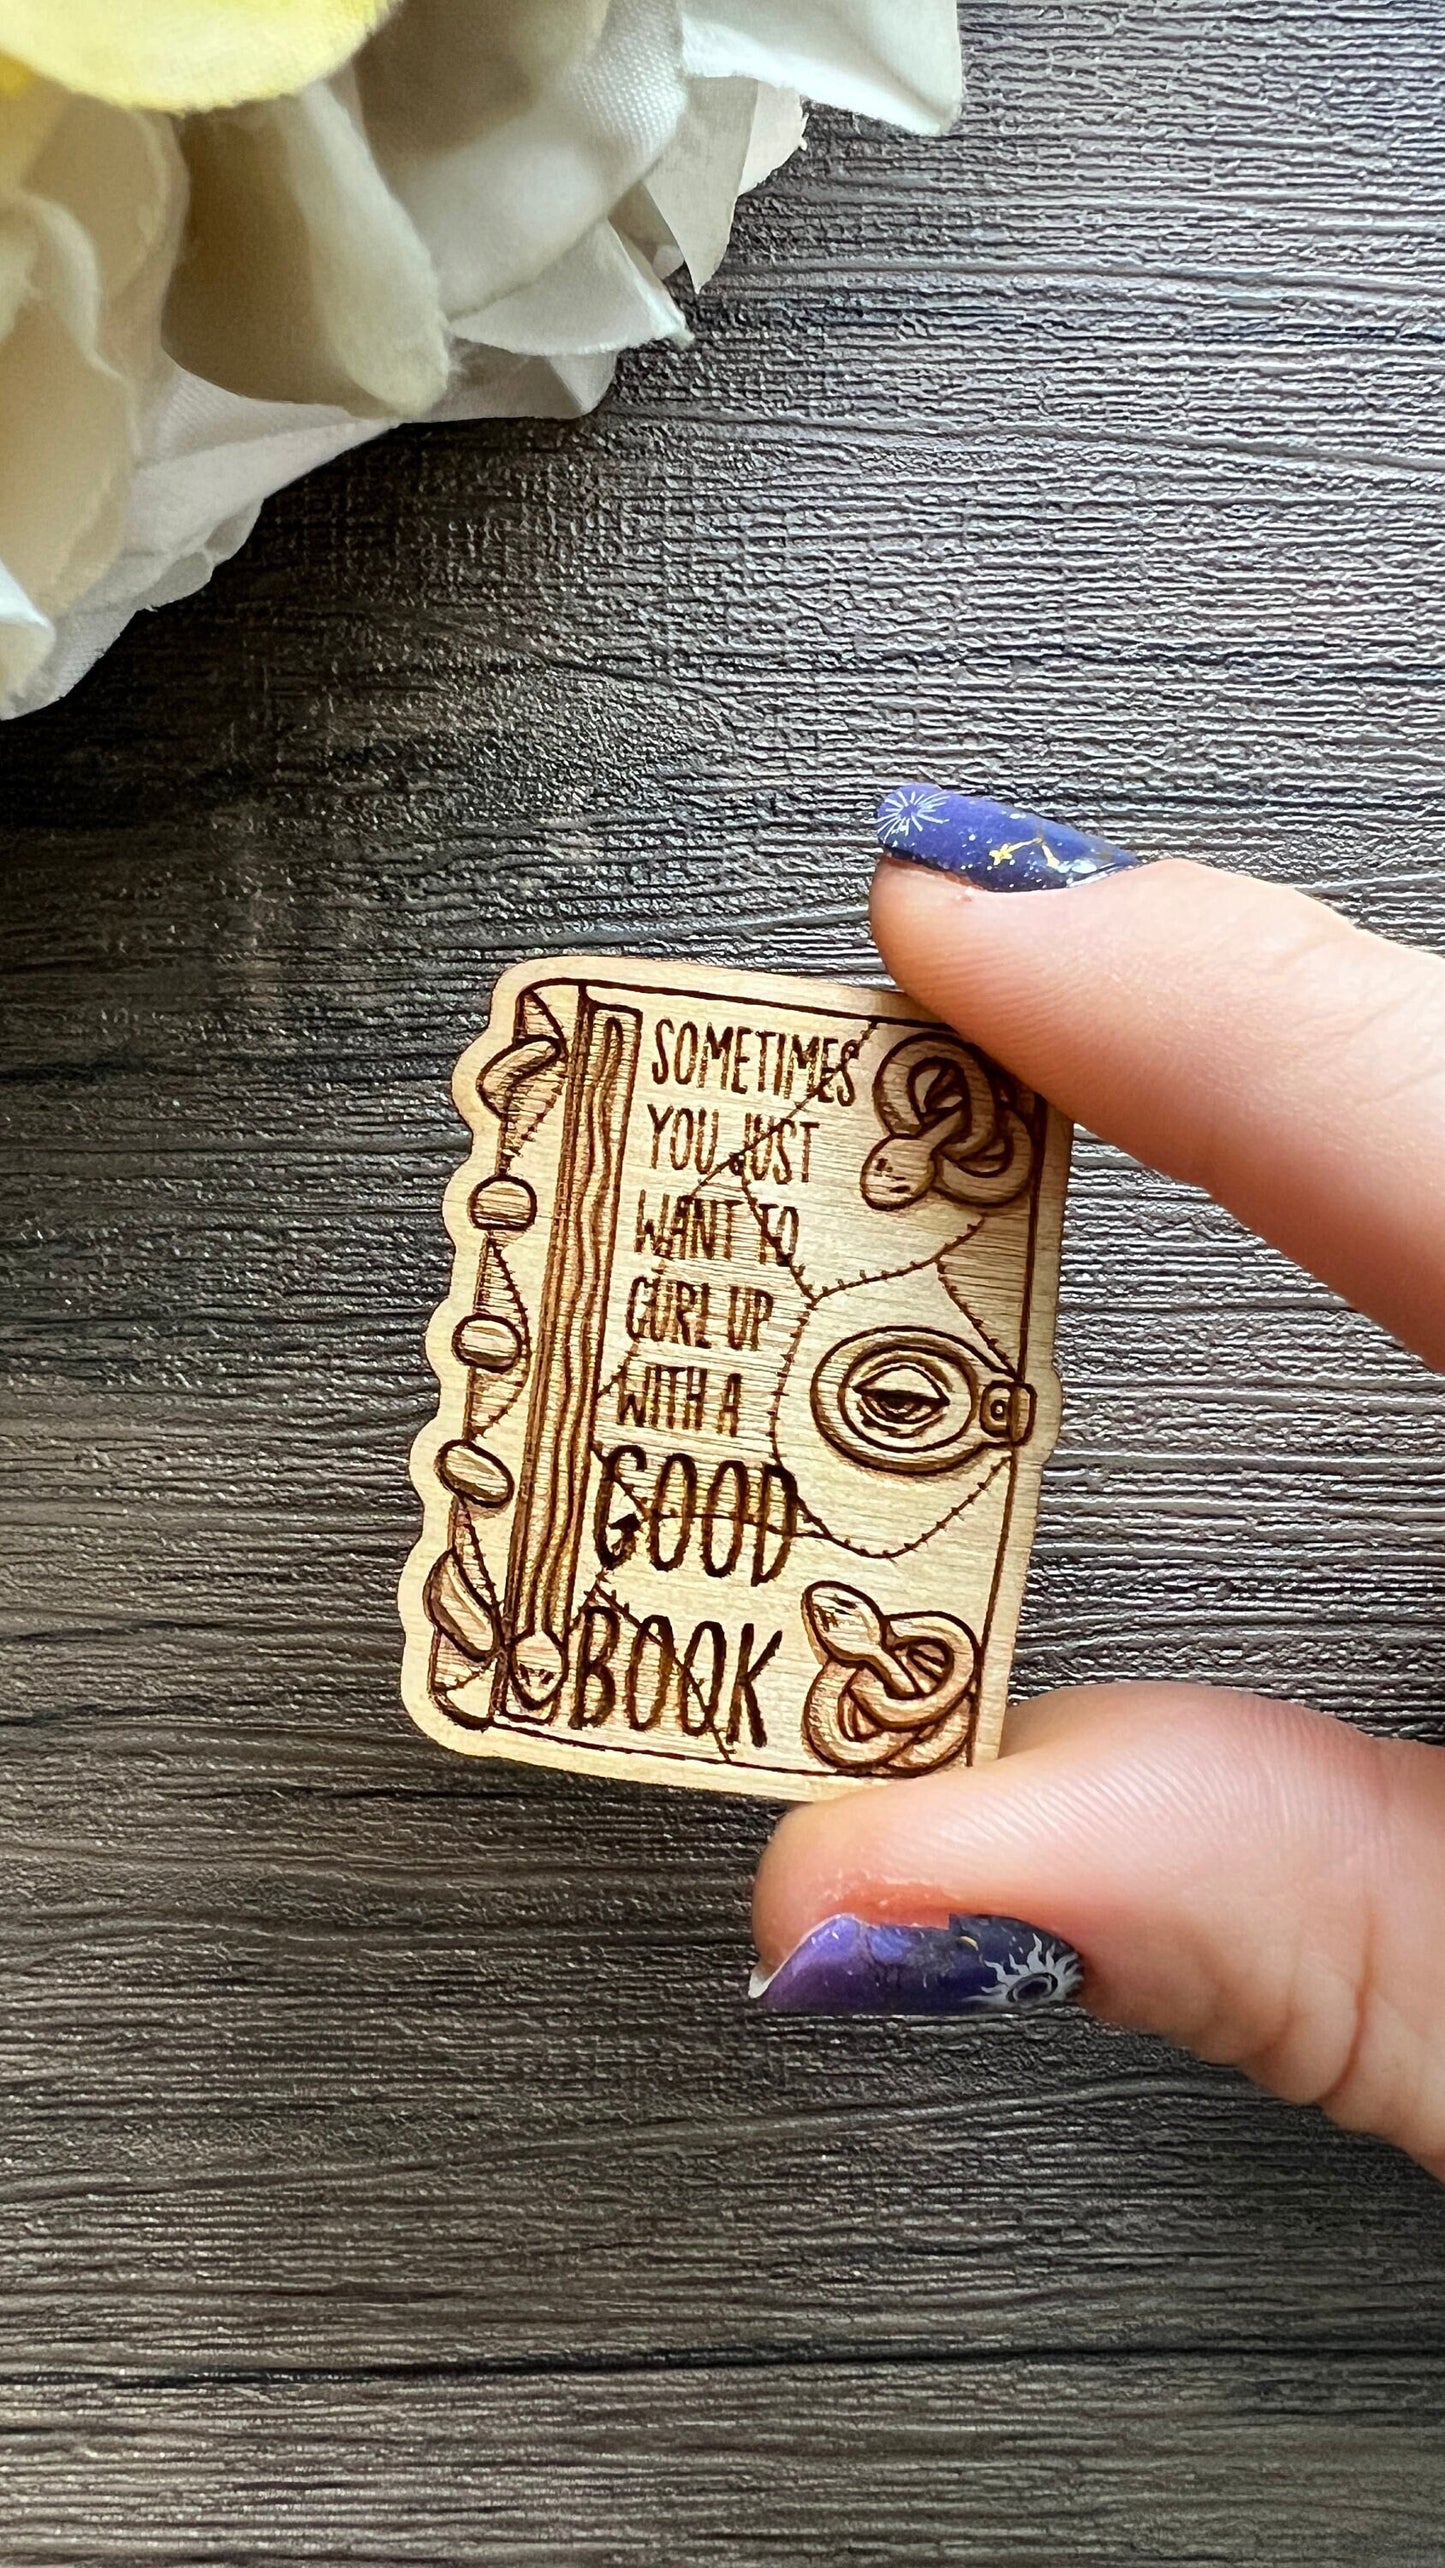 Hocus Pocus Spell Book PIN - Lapel Pin - Book Pin, Hocus Pocus Pin, Halloween Pin, Sanderson Sisters Pin, Binx Pin, I Put a Spell on You Pin